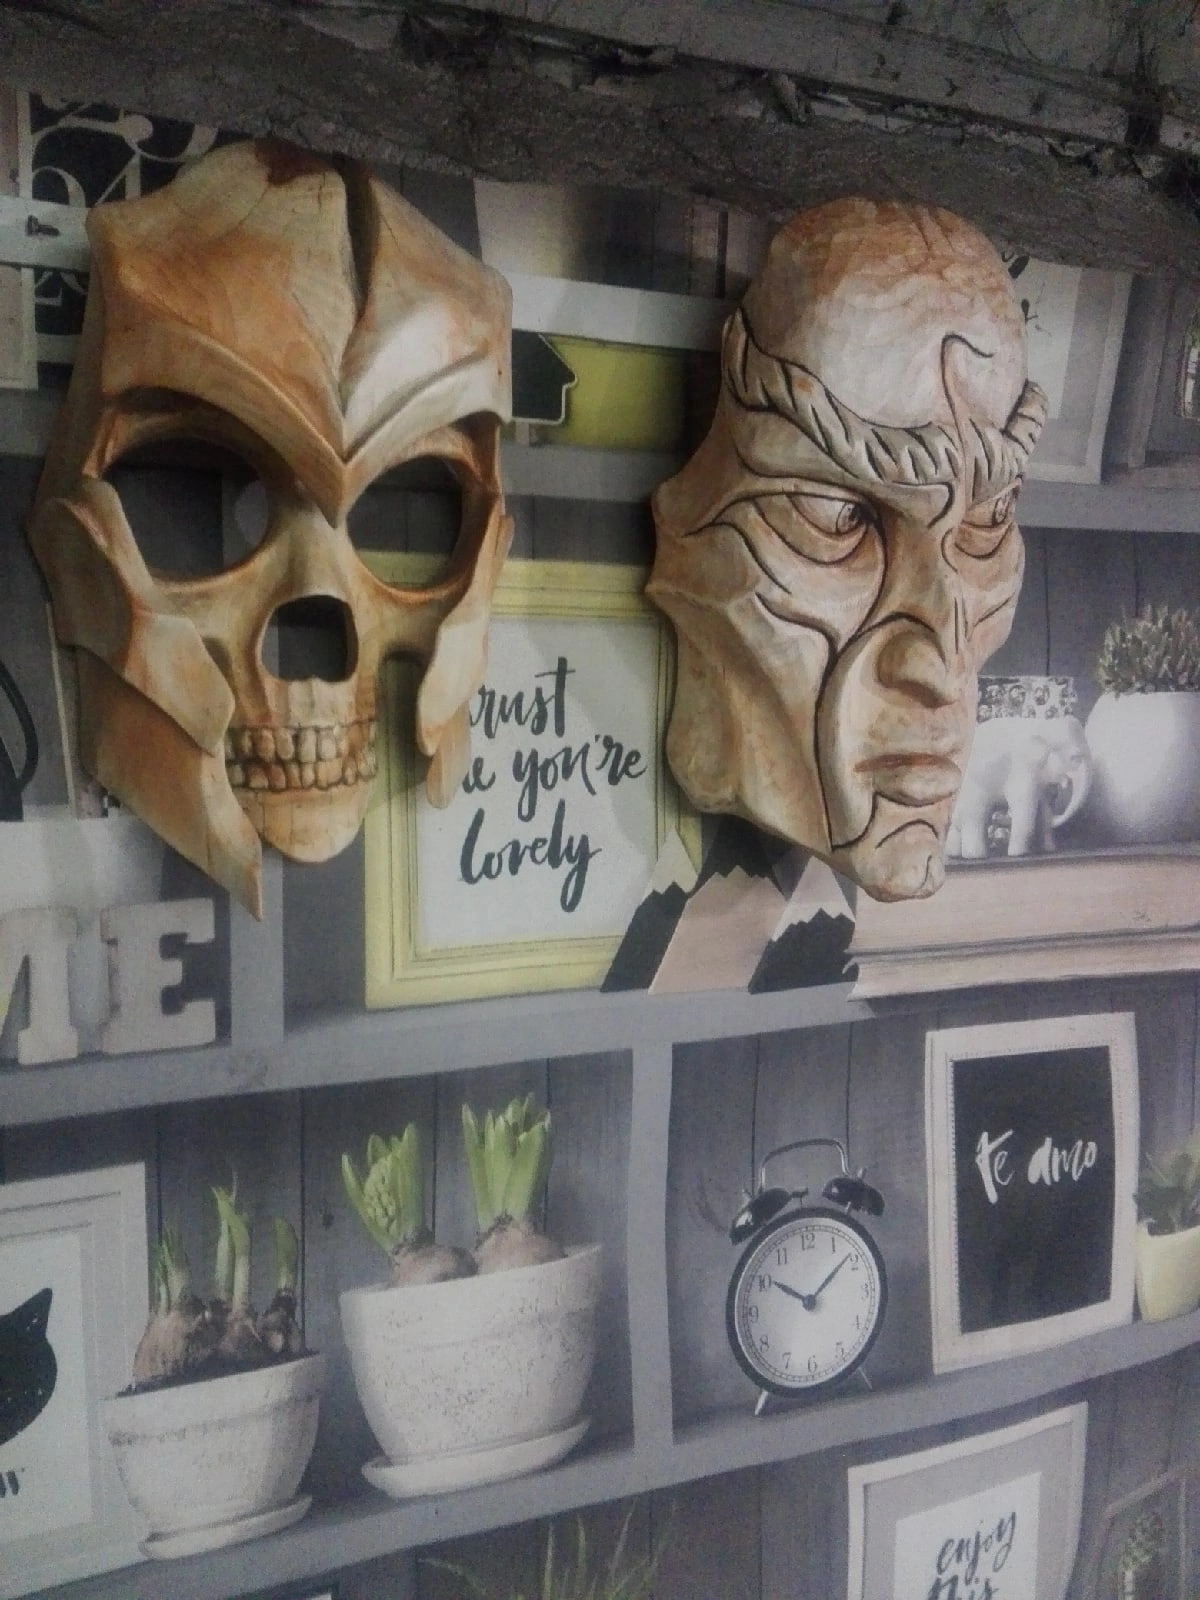 These are the masks. - My, Wood carving, Sculpture, Presents, Souvenirs, Tree, Handmade, Woodworking, Mask, Interior, Longpost